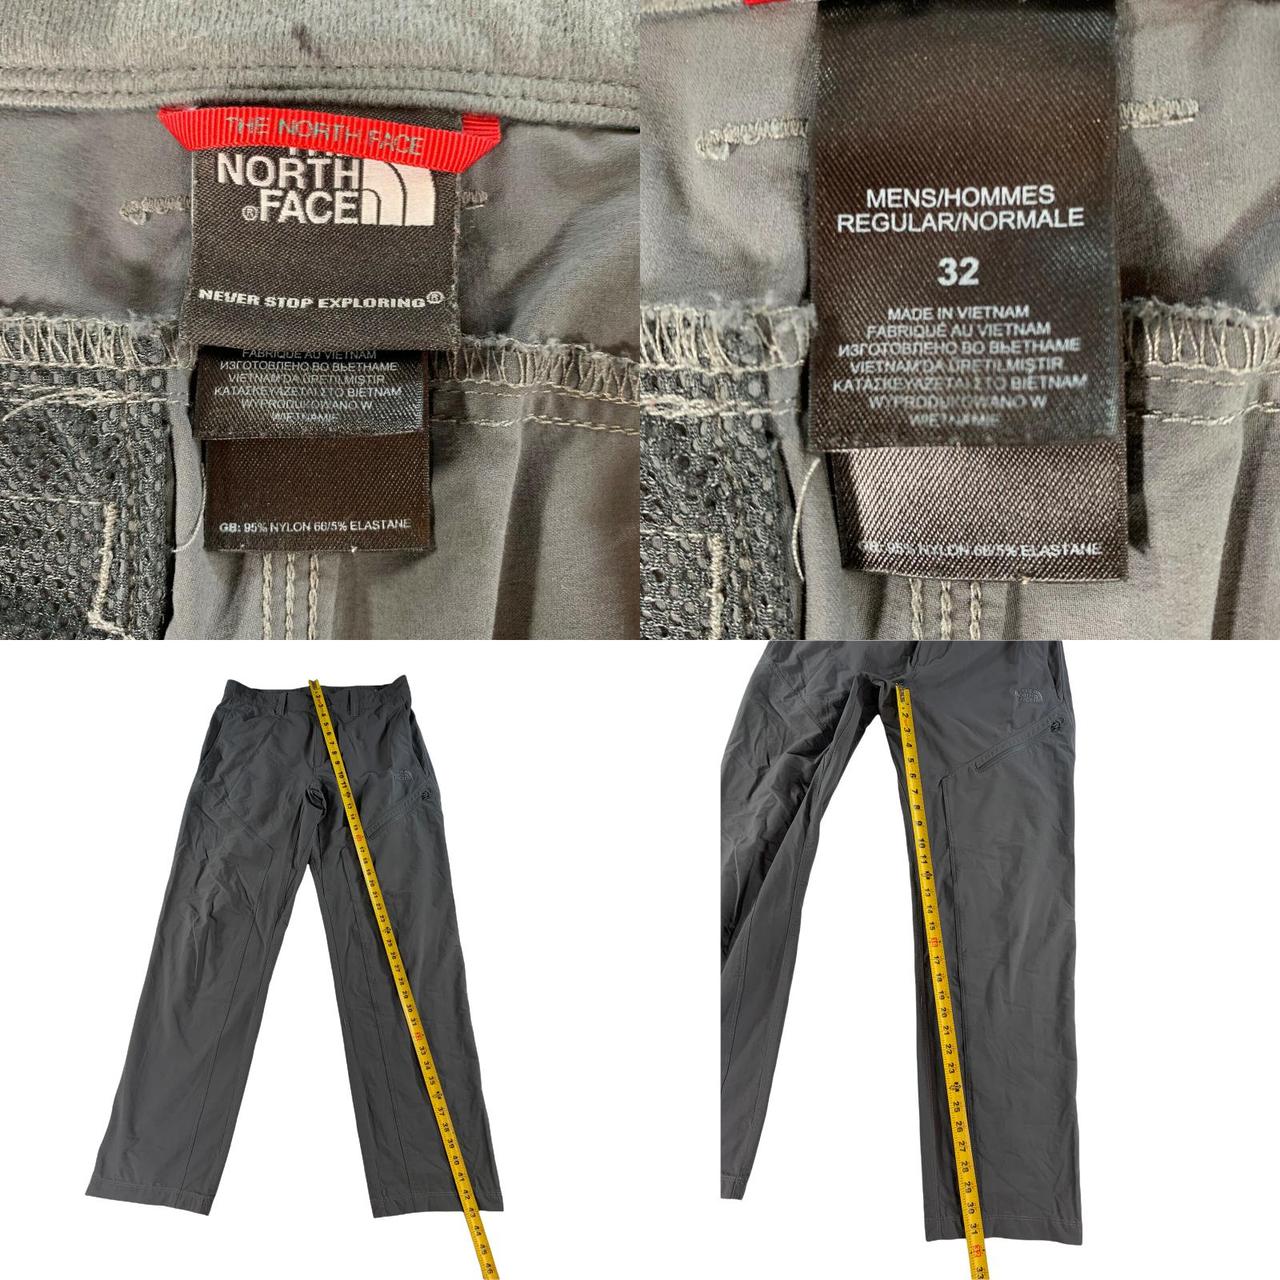 The North Face Men's Nylon Stretch Hiking Outdoor - Depop